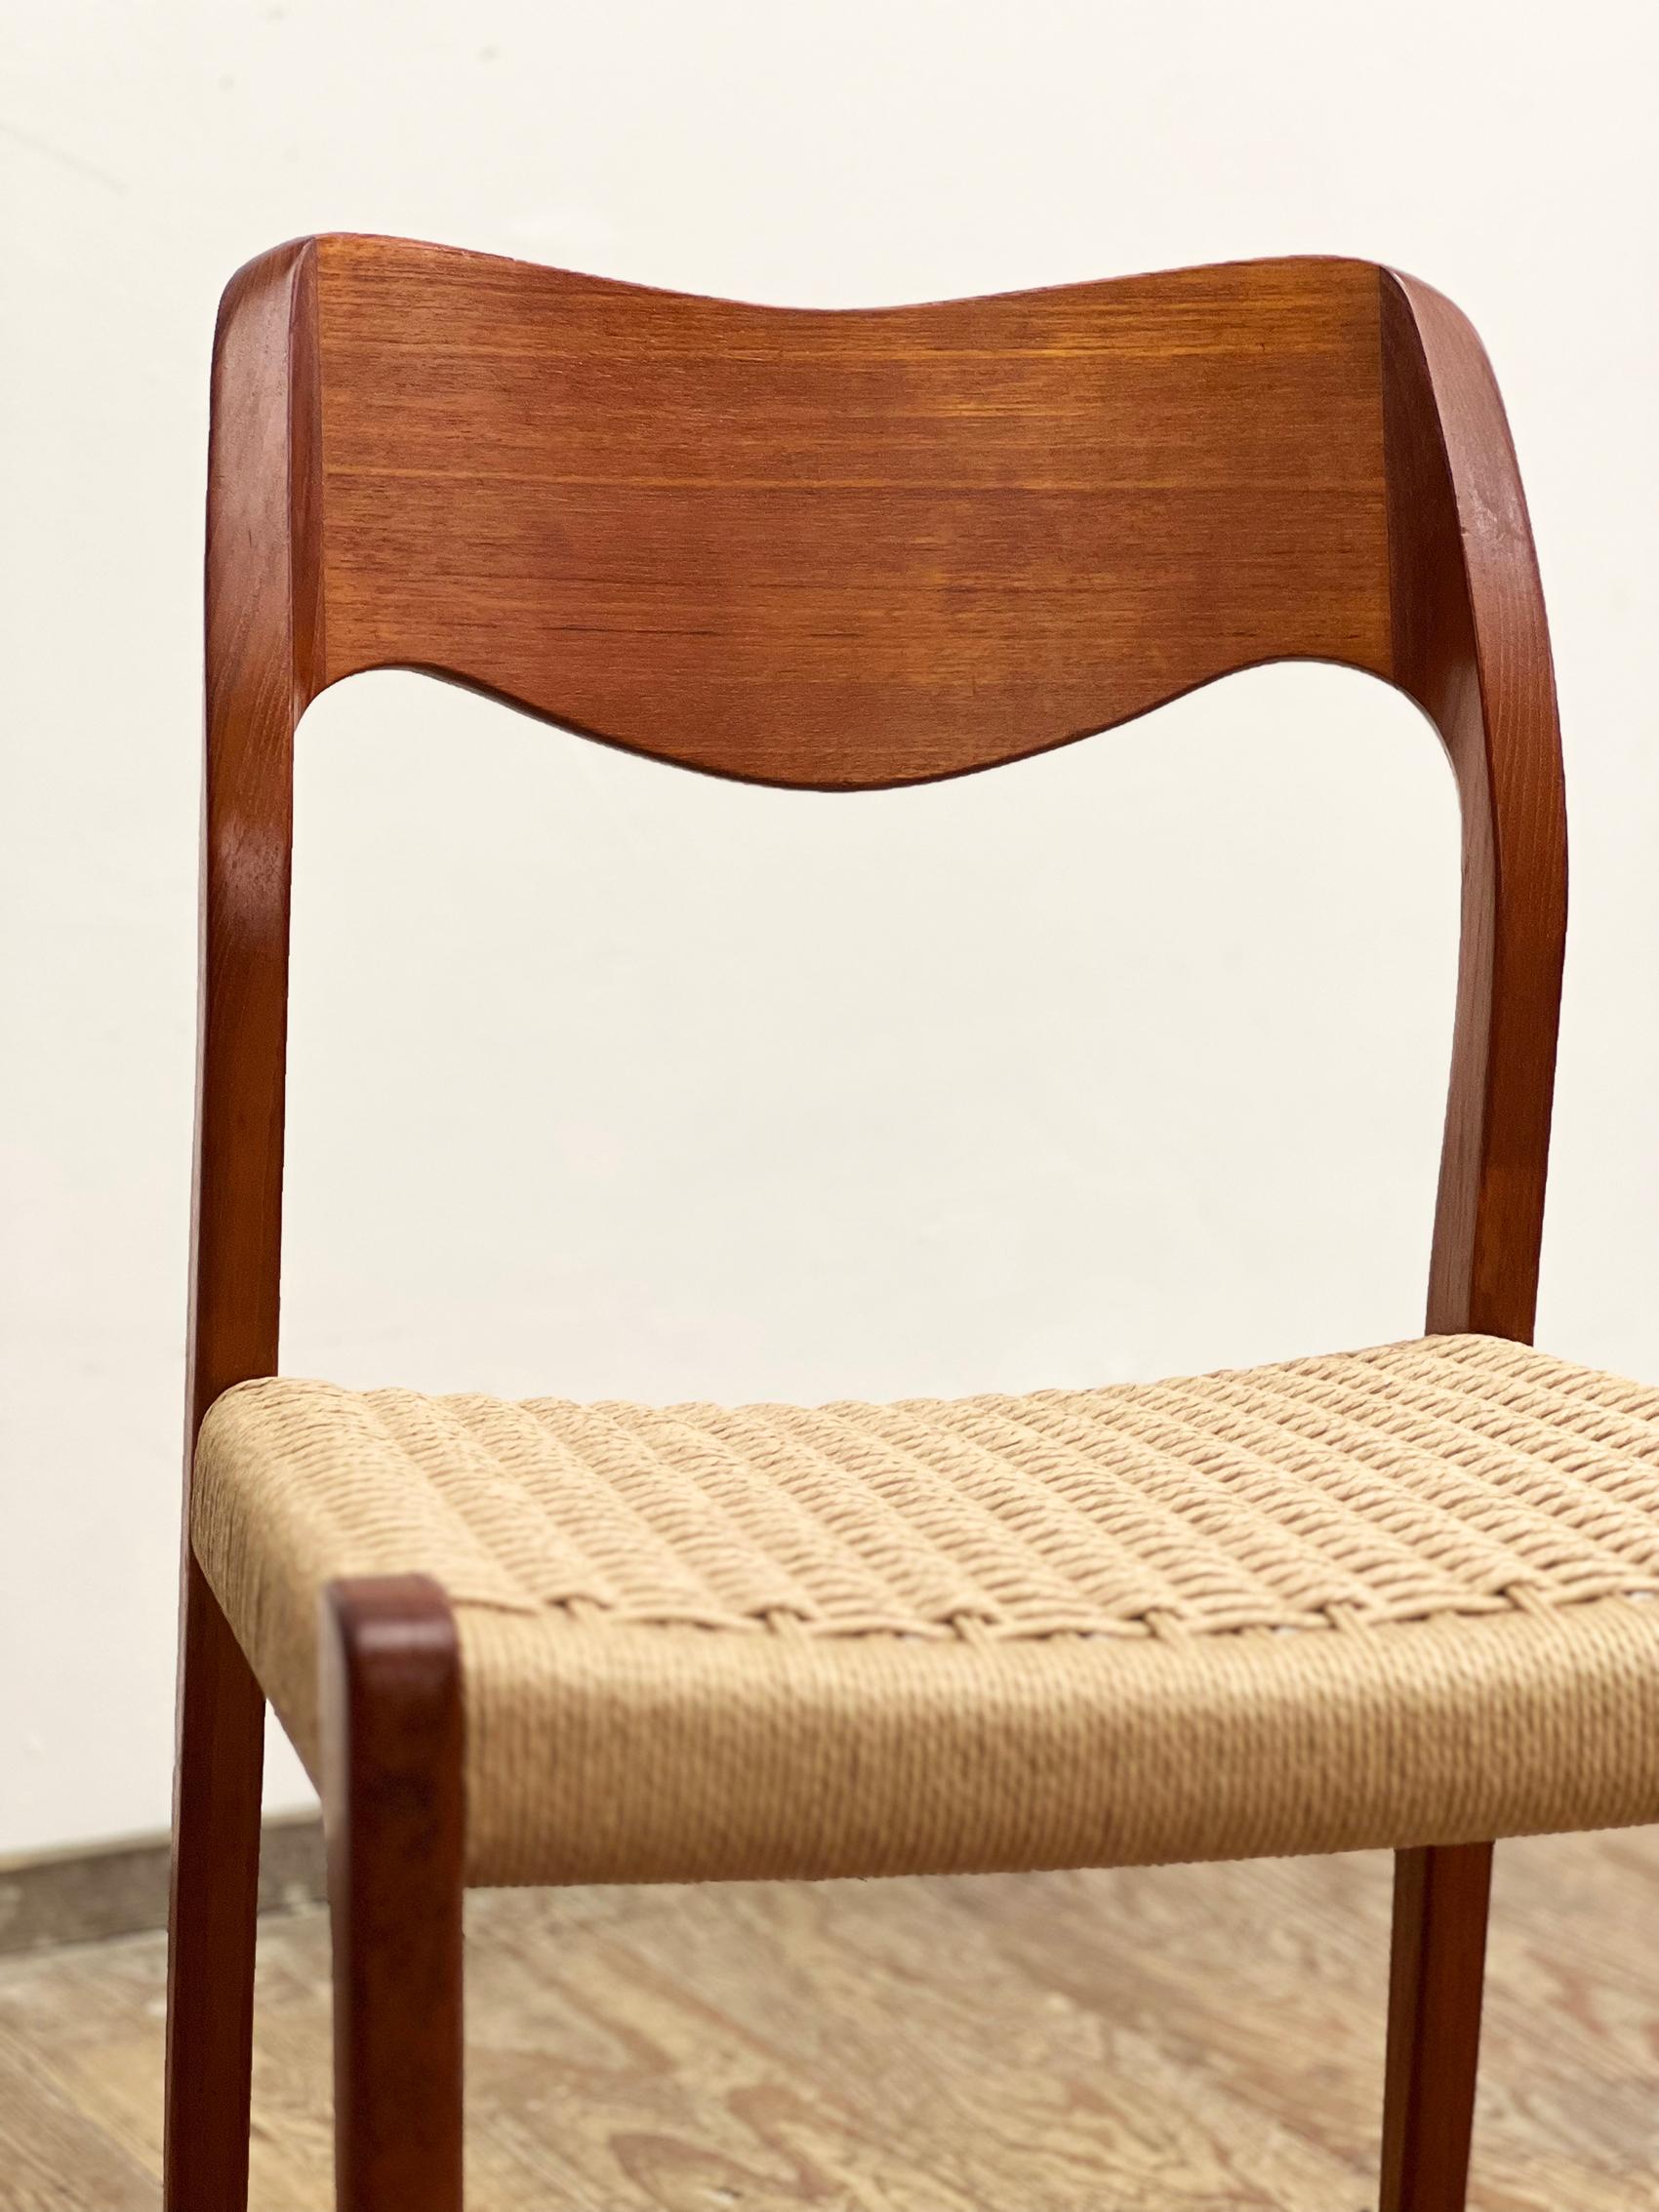 Mid-20th Century Mid-Century Teak Dining Chairs #71 by Niels O. Møller for J. L. Moller, Set of 2